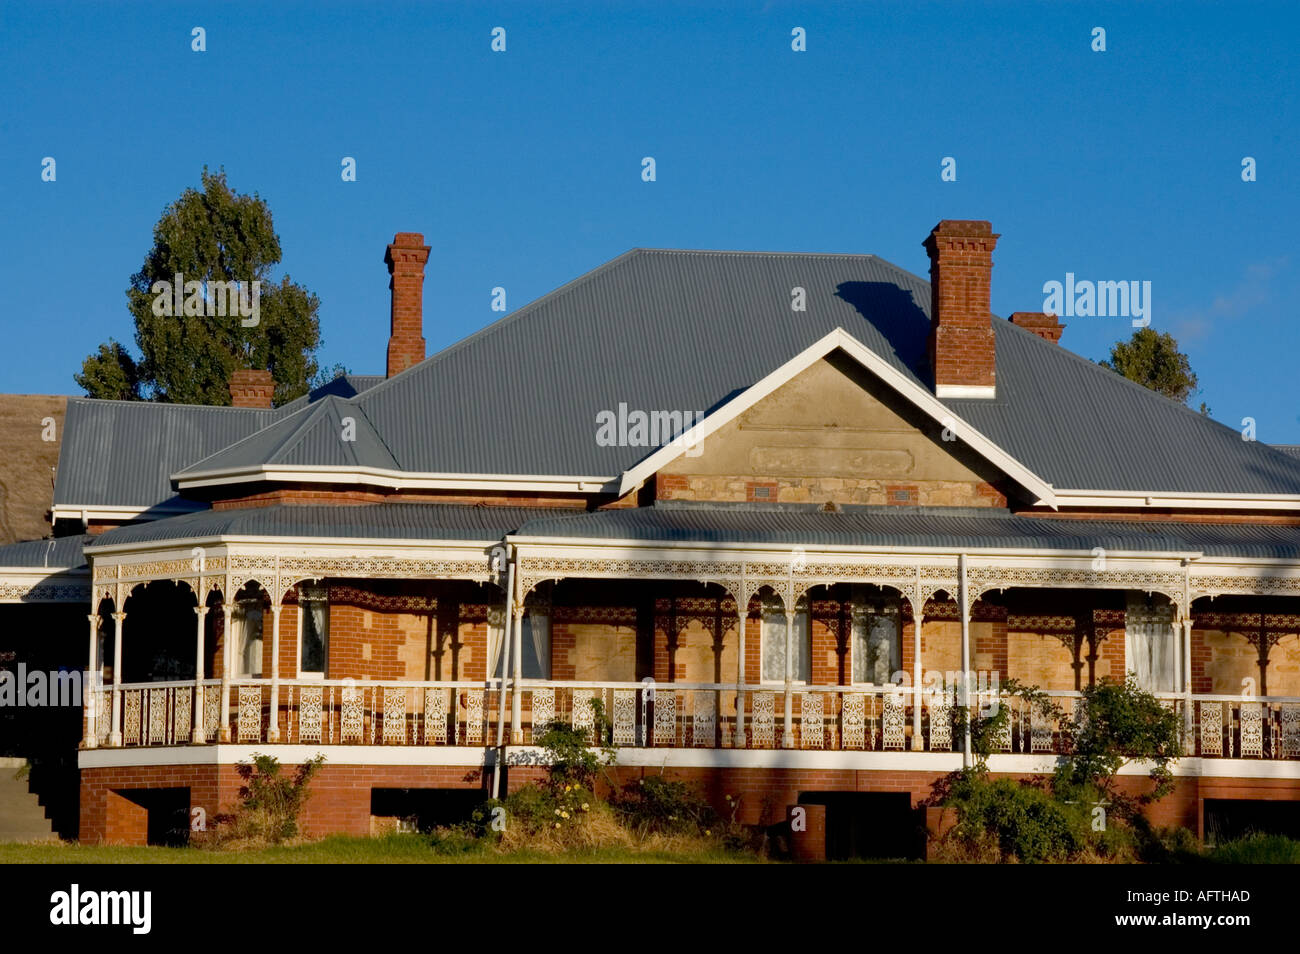 Ranch House Australia High Resolution Stock Photography and Images - Alamy